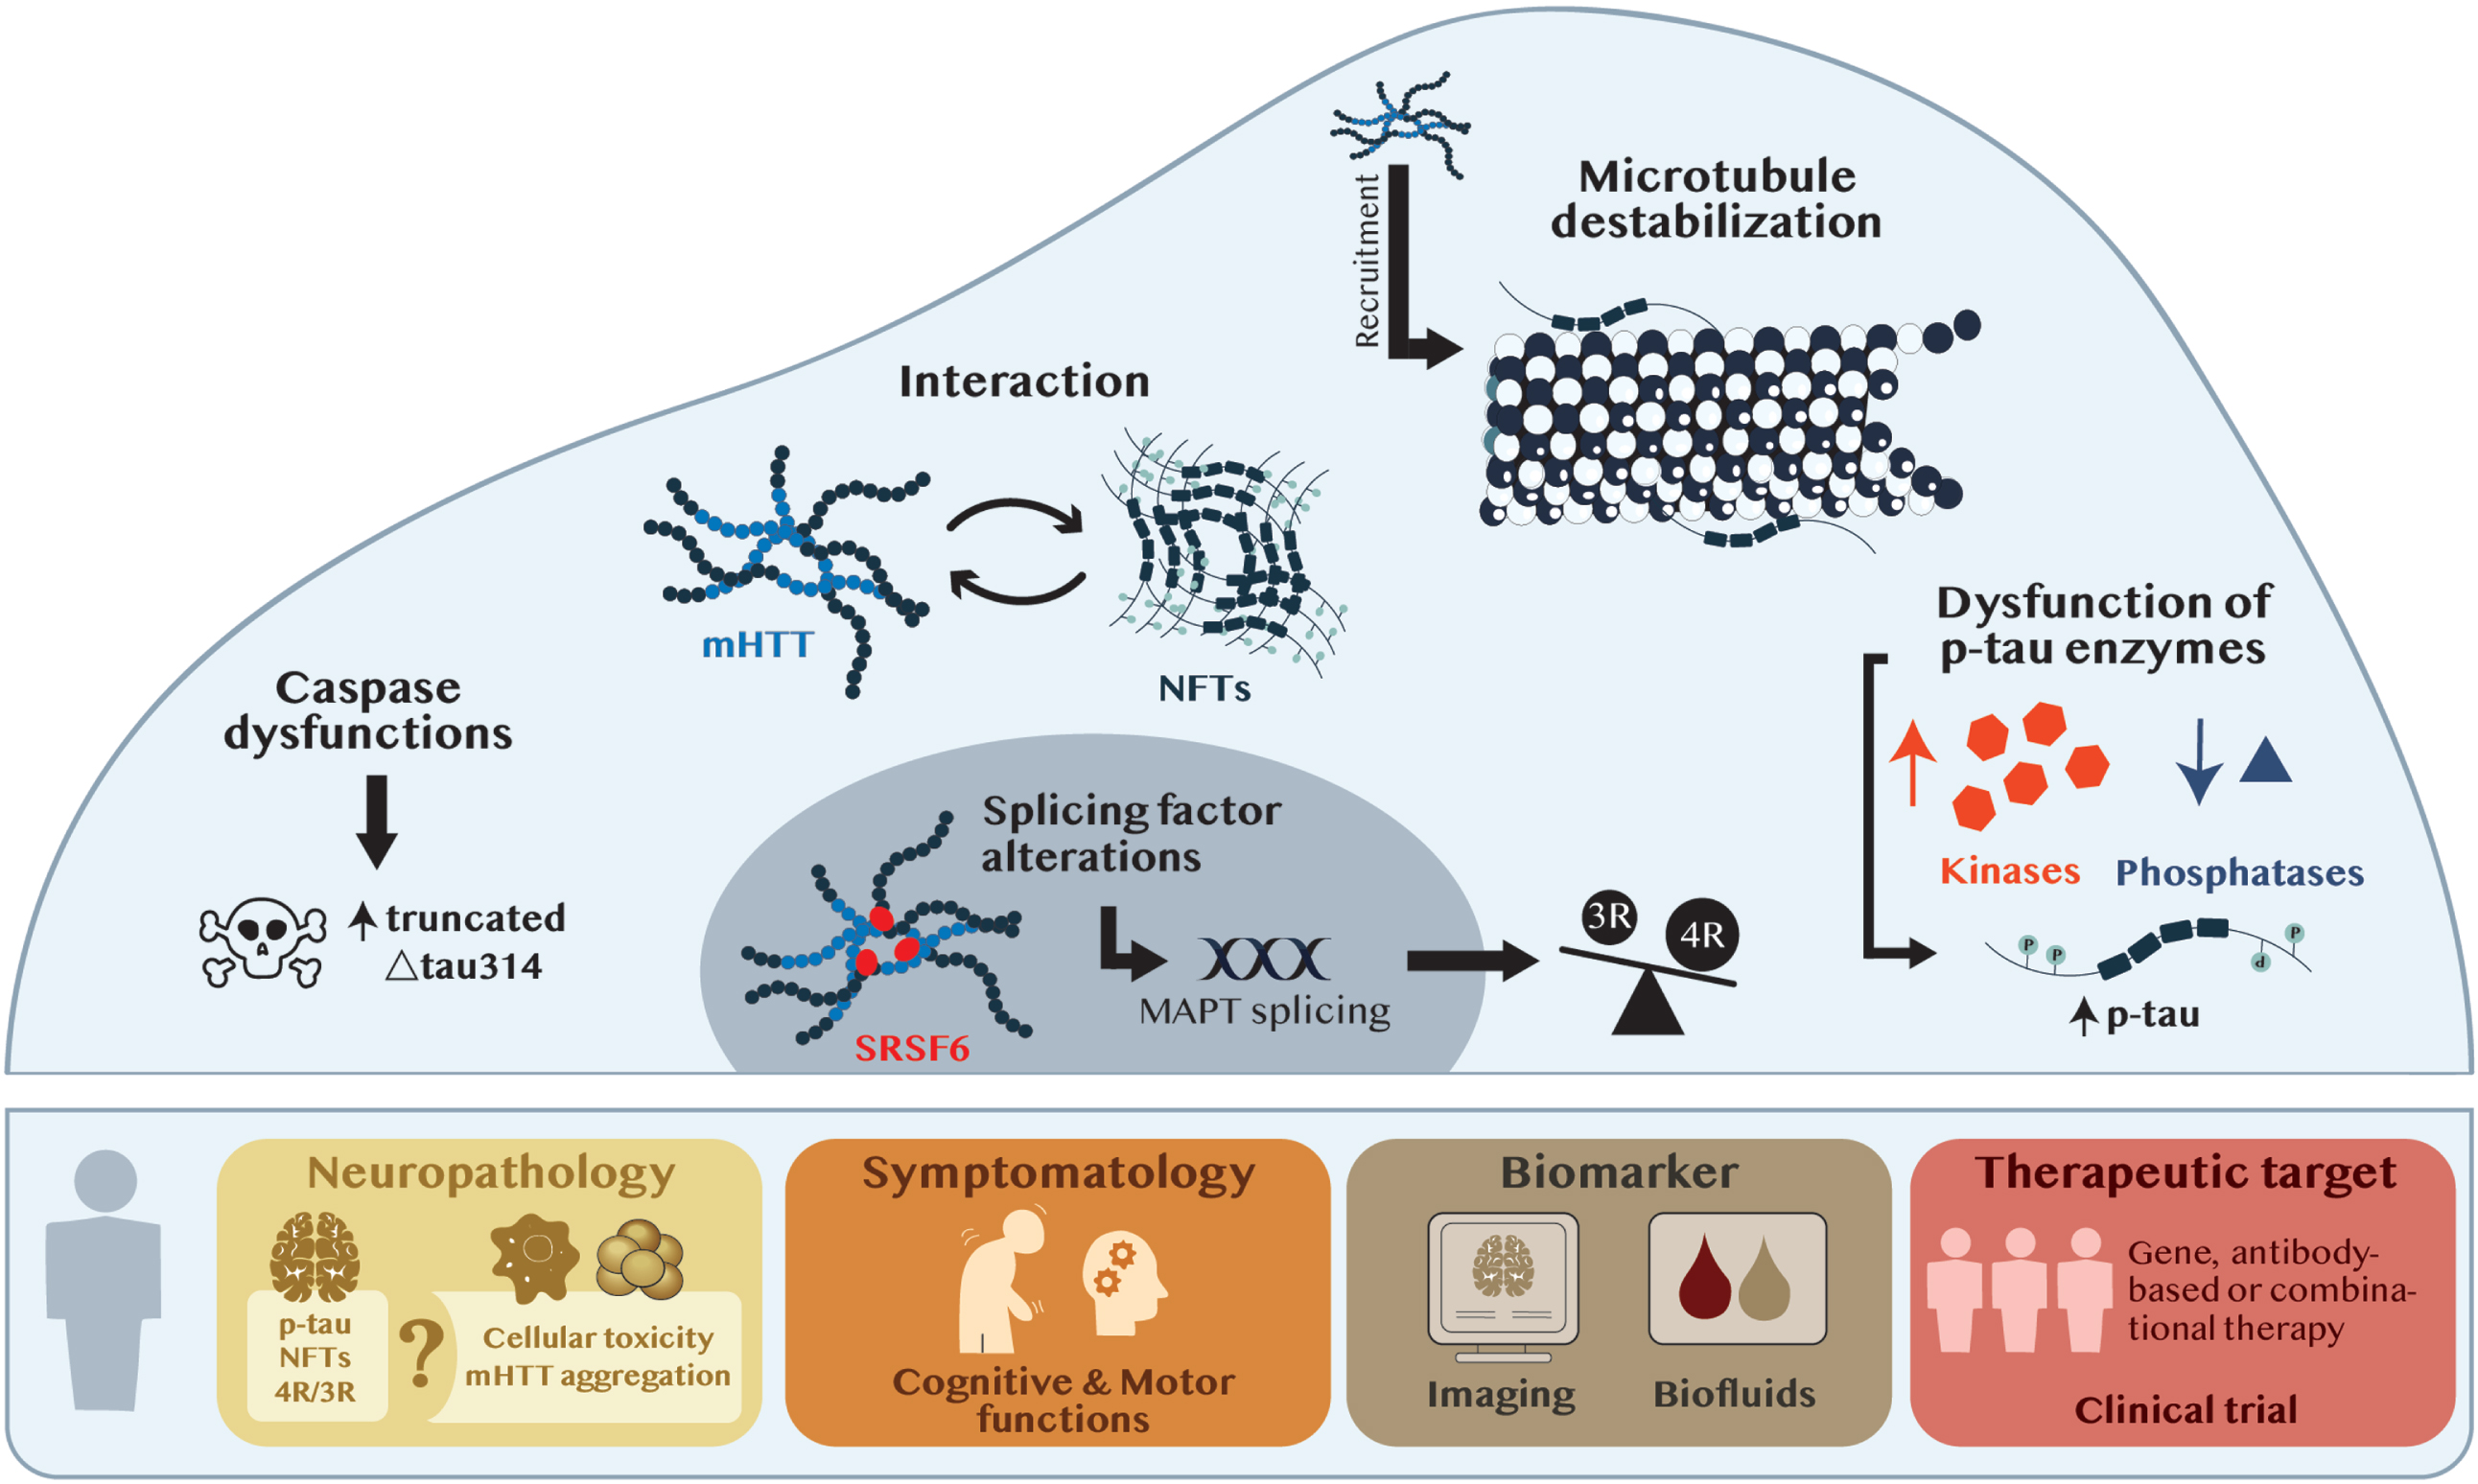 From tau neuropathology to tau therapeutics. The upper panel illustrates the mechanisms of action potentially shared between tau and mHTT at the cellular level. The bottom panel represents the potential implications of tau on the neuropathology and symptomatology of HD and implying its clinic relevance as a biomarker and/or therapeutic target. Abbreviations: MAPT, microtubule associated protein tau; mHTT, mutant huntintin; NFTs, neurofibrillary tangles; p-tau, phosphorylated tau; SRSF6, serine/arginine-rich splicing factor-6; 3R, 3R isoform of tau; 4R, 4R isoform of tau; Δtau314, truncated tau314 protein.